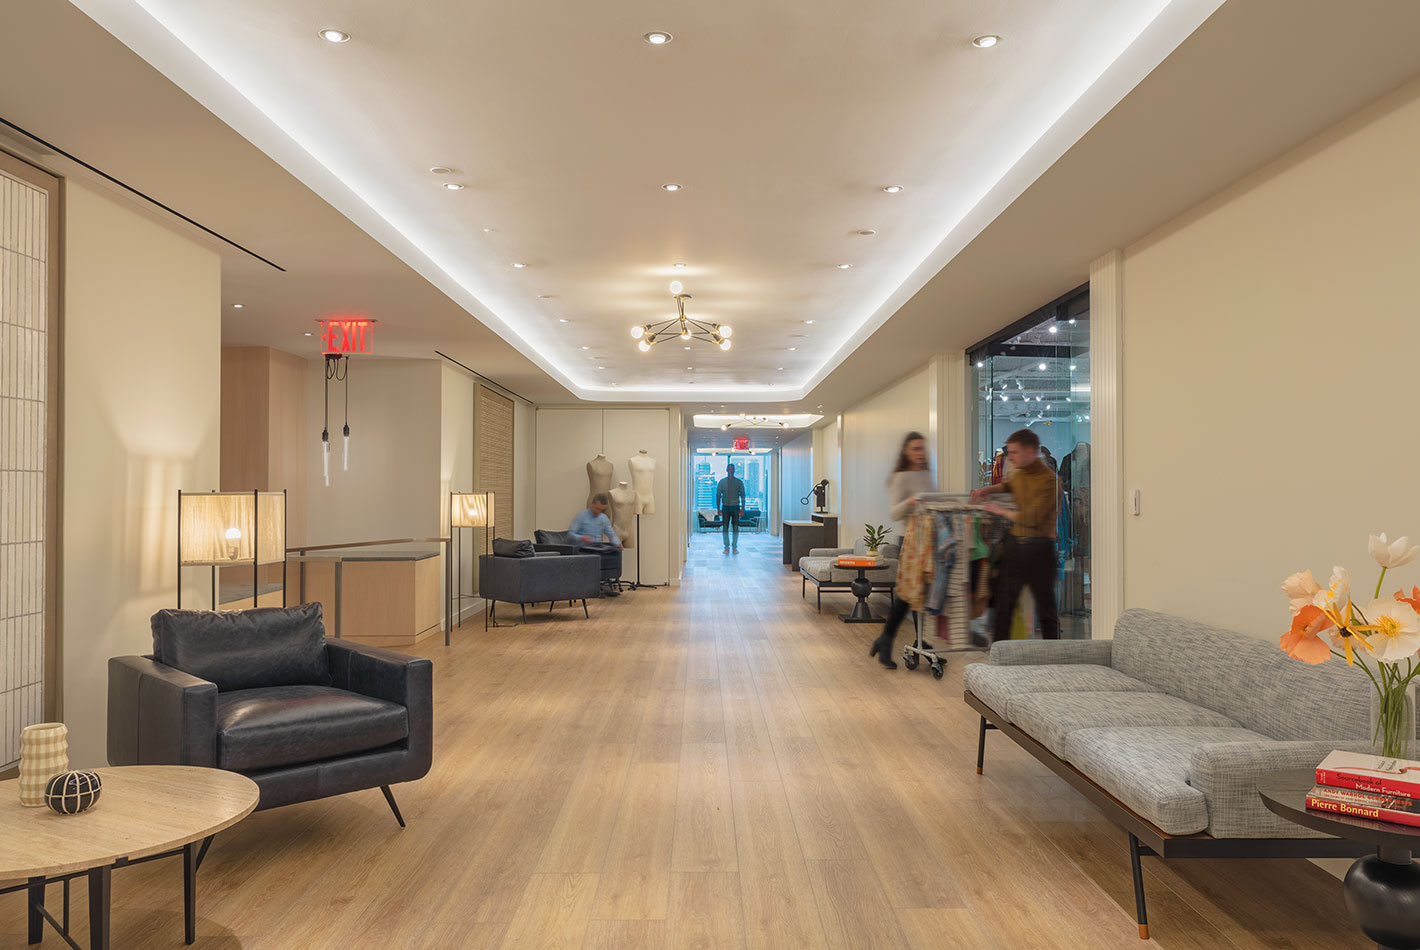 Cove lighting illuminates the reception area at J Crew Headquarters. Several seating areas are arranged on the bleached oak floors.